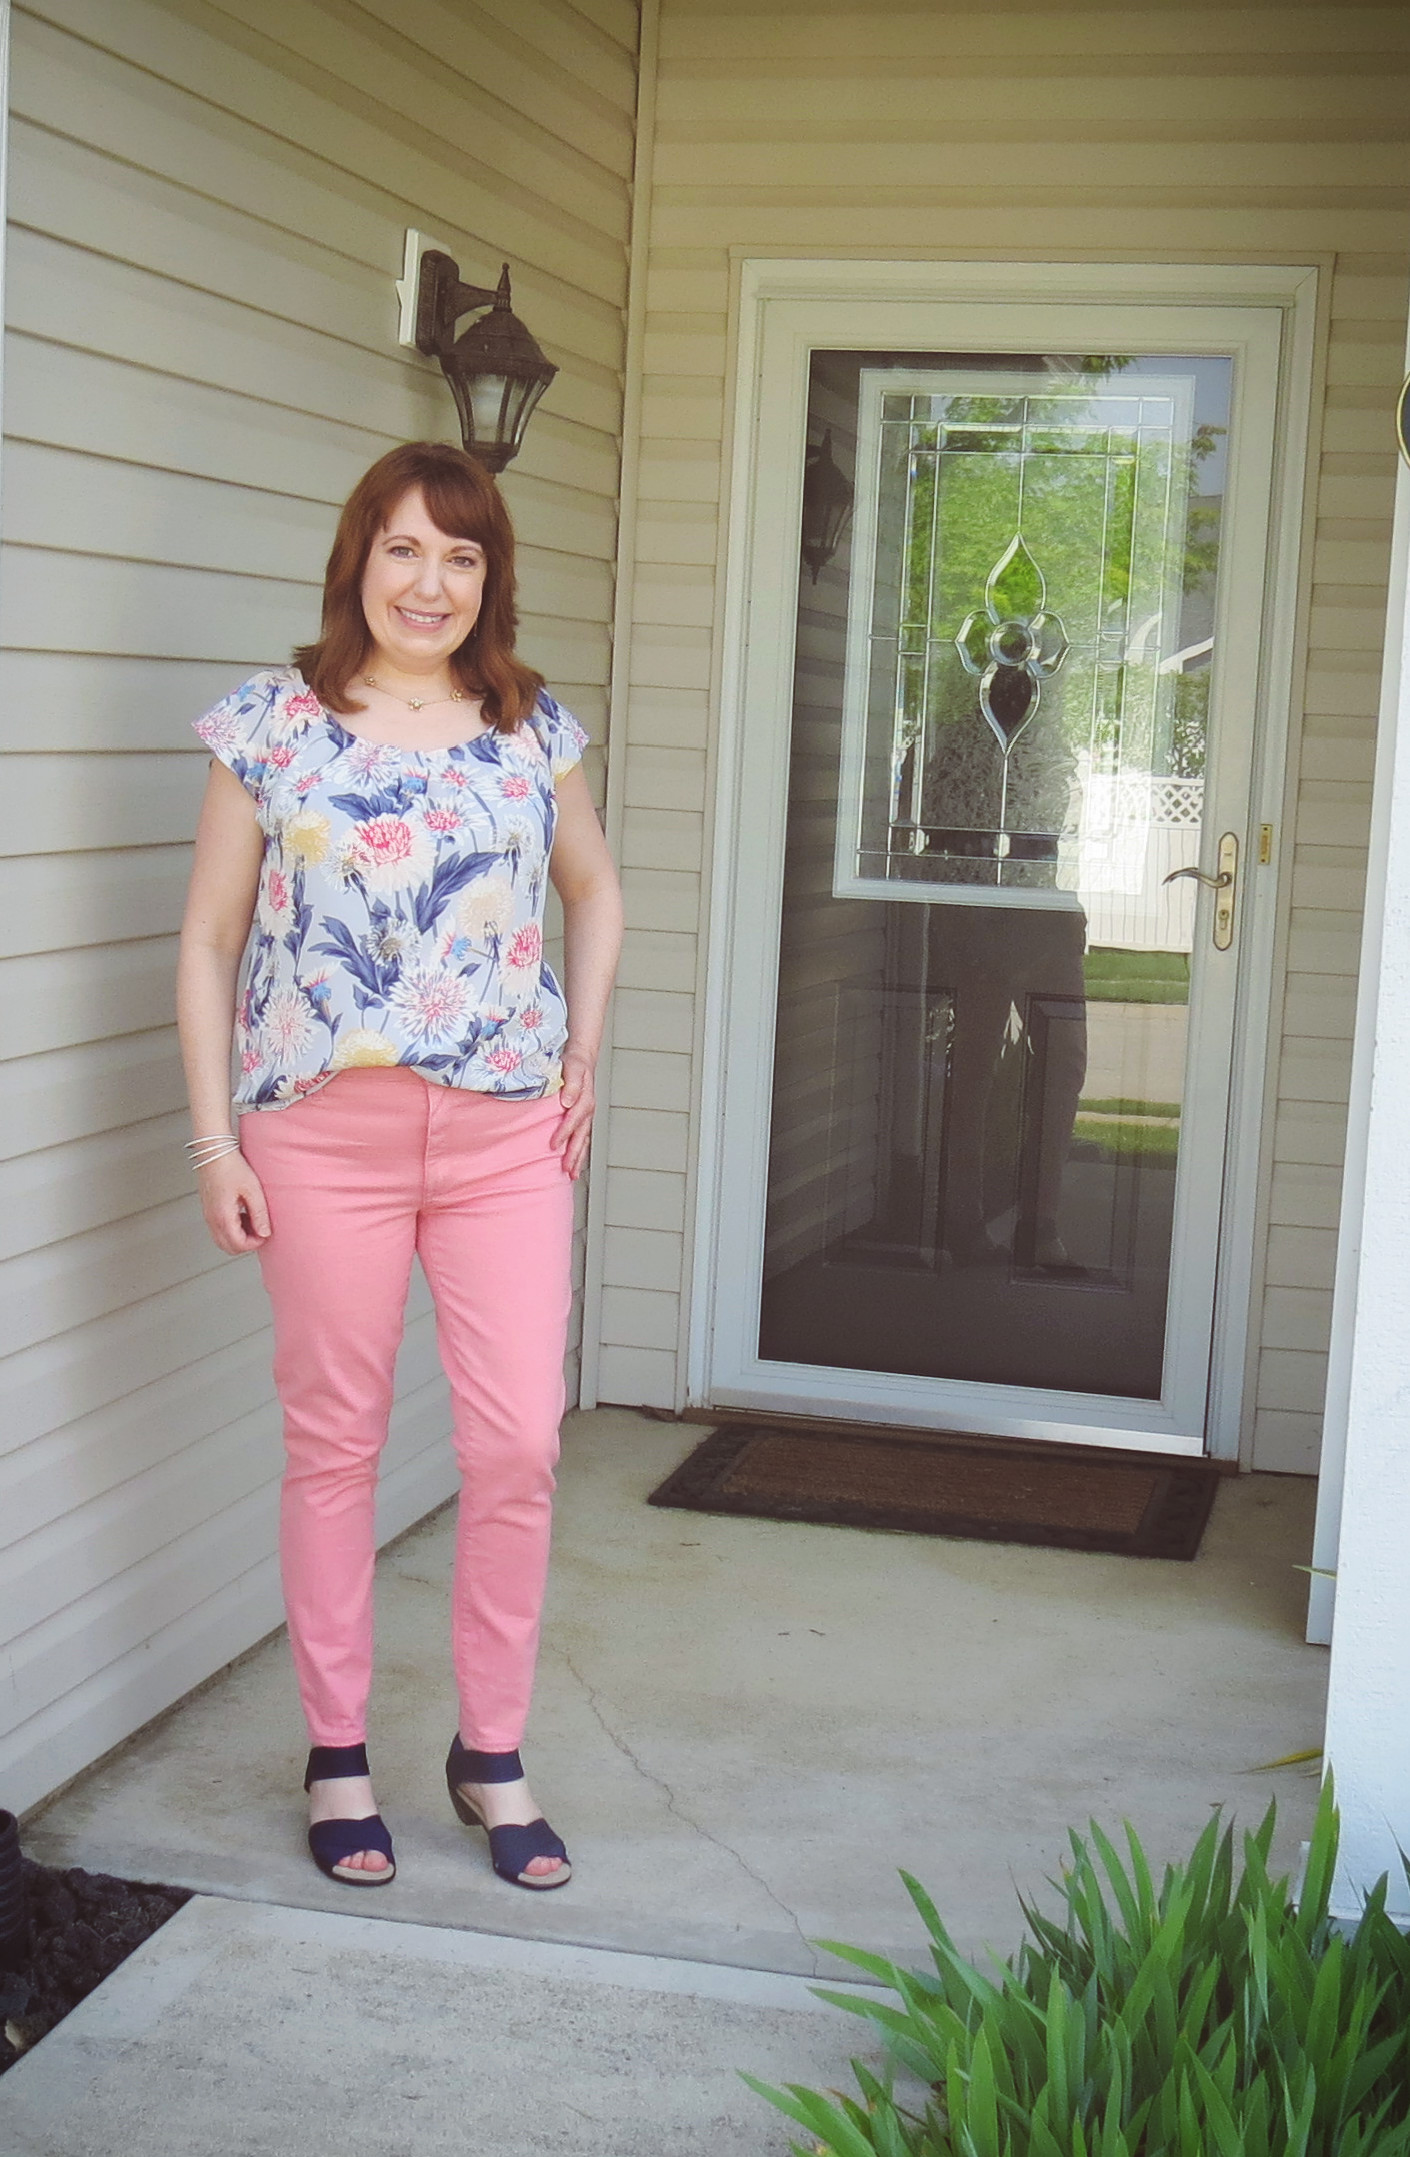 Floral Top And Pink Jeans WIth Navy Sandals